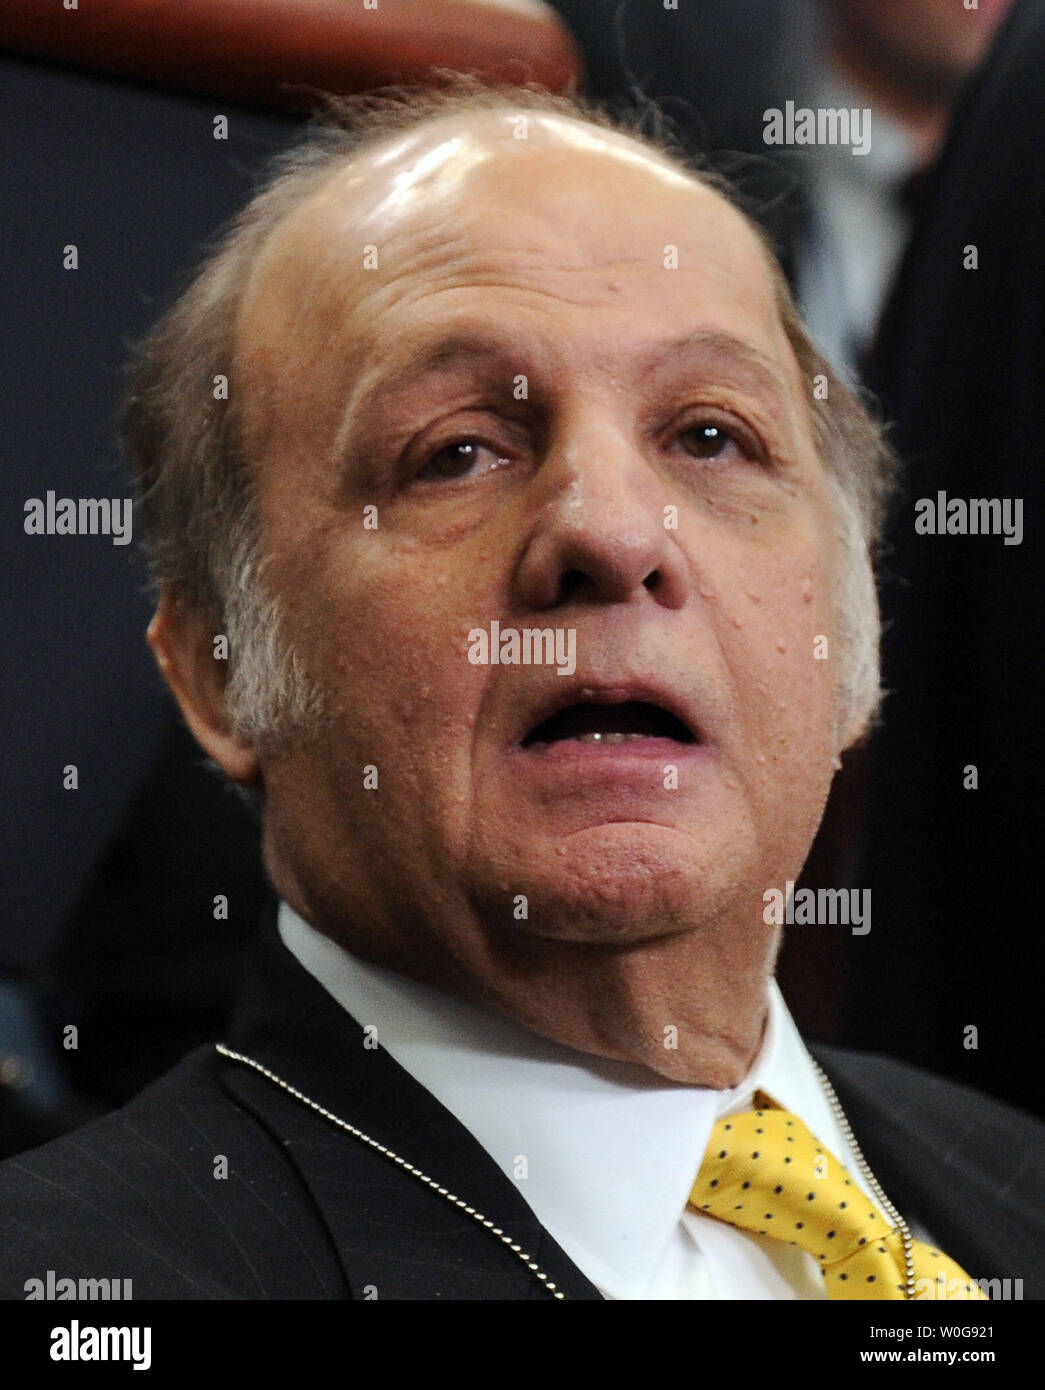 Jim Brady, Ronald Reagan's former press secretary who was shot along with Reagan 30 years ago today, visits the Brady Press Briefing Room in the White House in Washington on March 30, 2011.     UPI/Roger L. Wollenberg Stock Photo